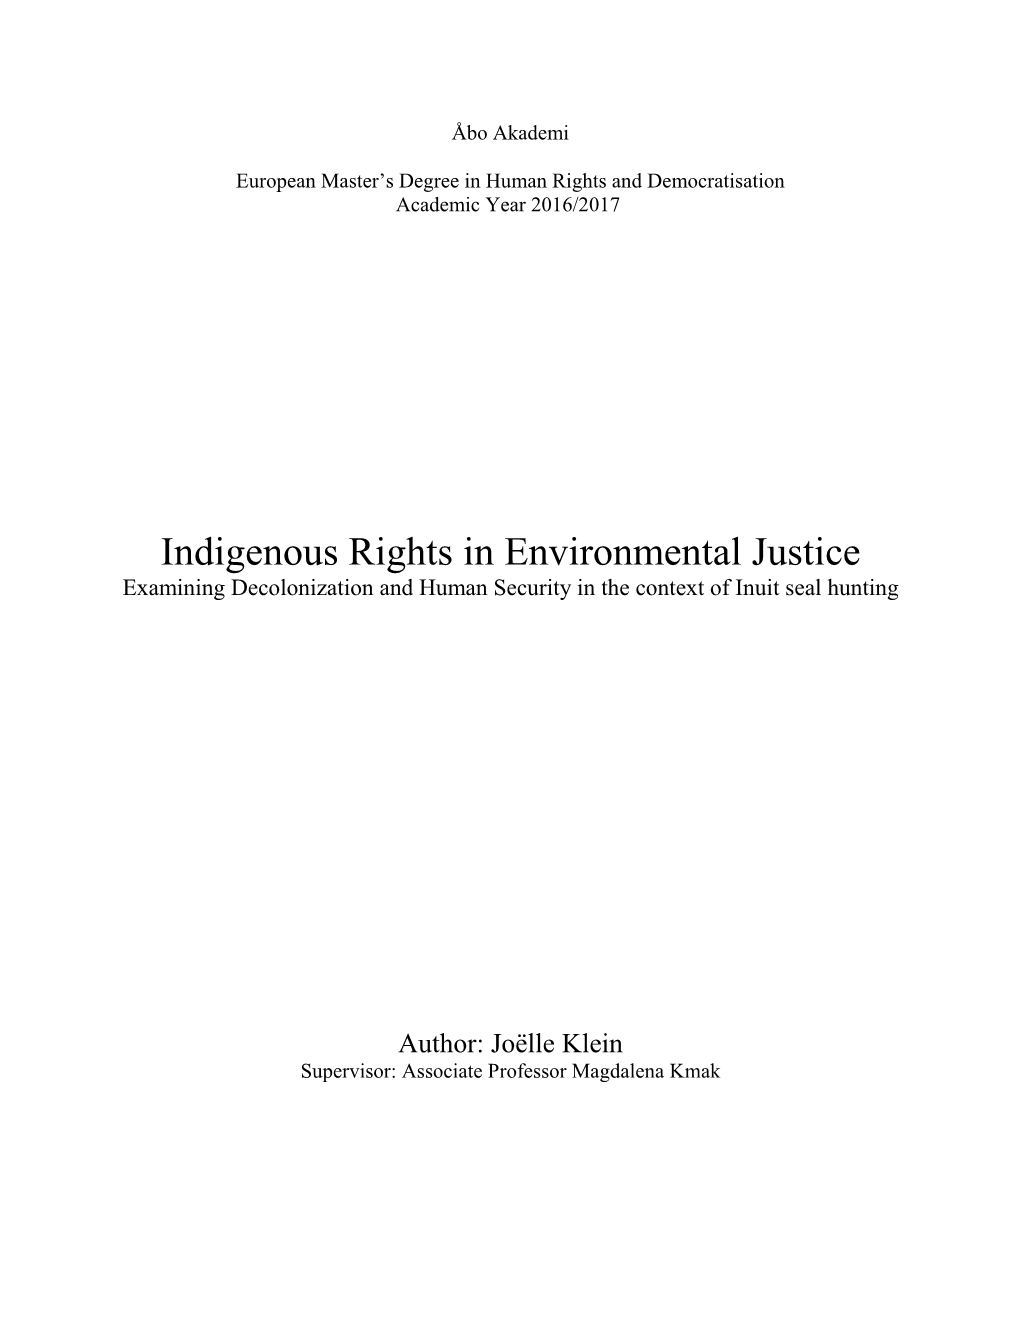 Indigenous Rights in Environmental Justice Examining Decolonization and Human Security in the Context of Inuit Seal Hunting